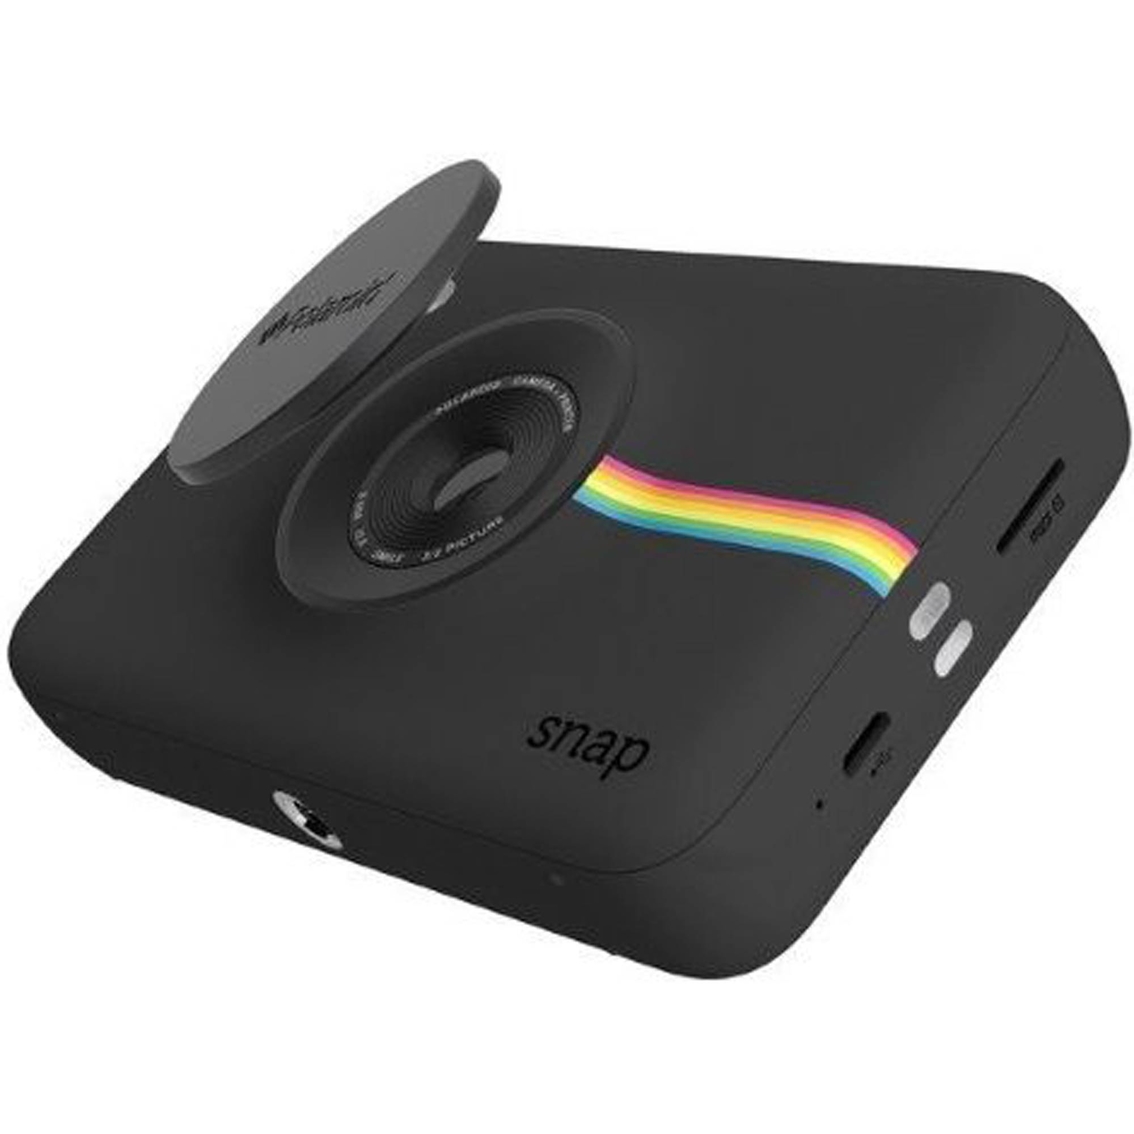 Polaroid Snap Instant Digital Camera with ZINK Zero Ink Printing Technology - Image 3 of 4